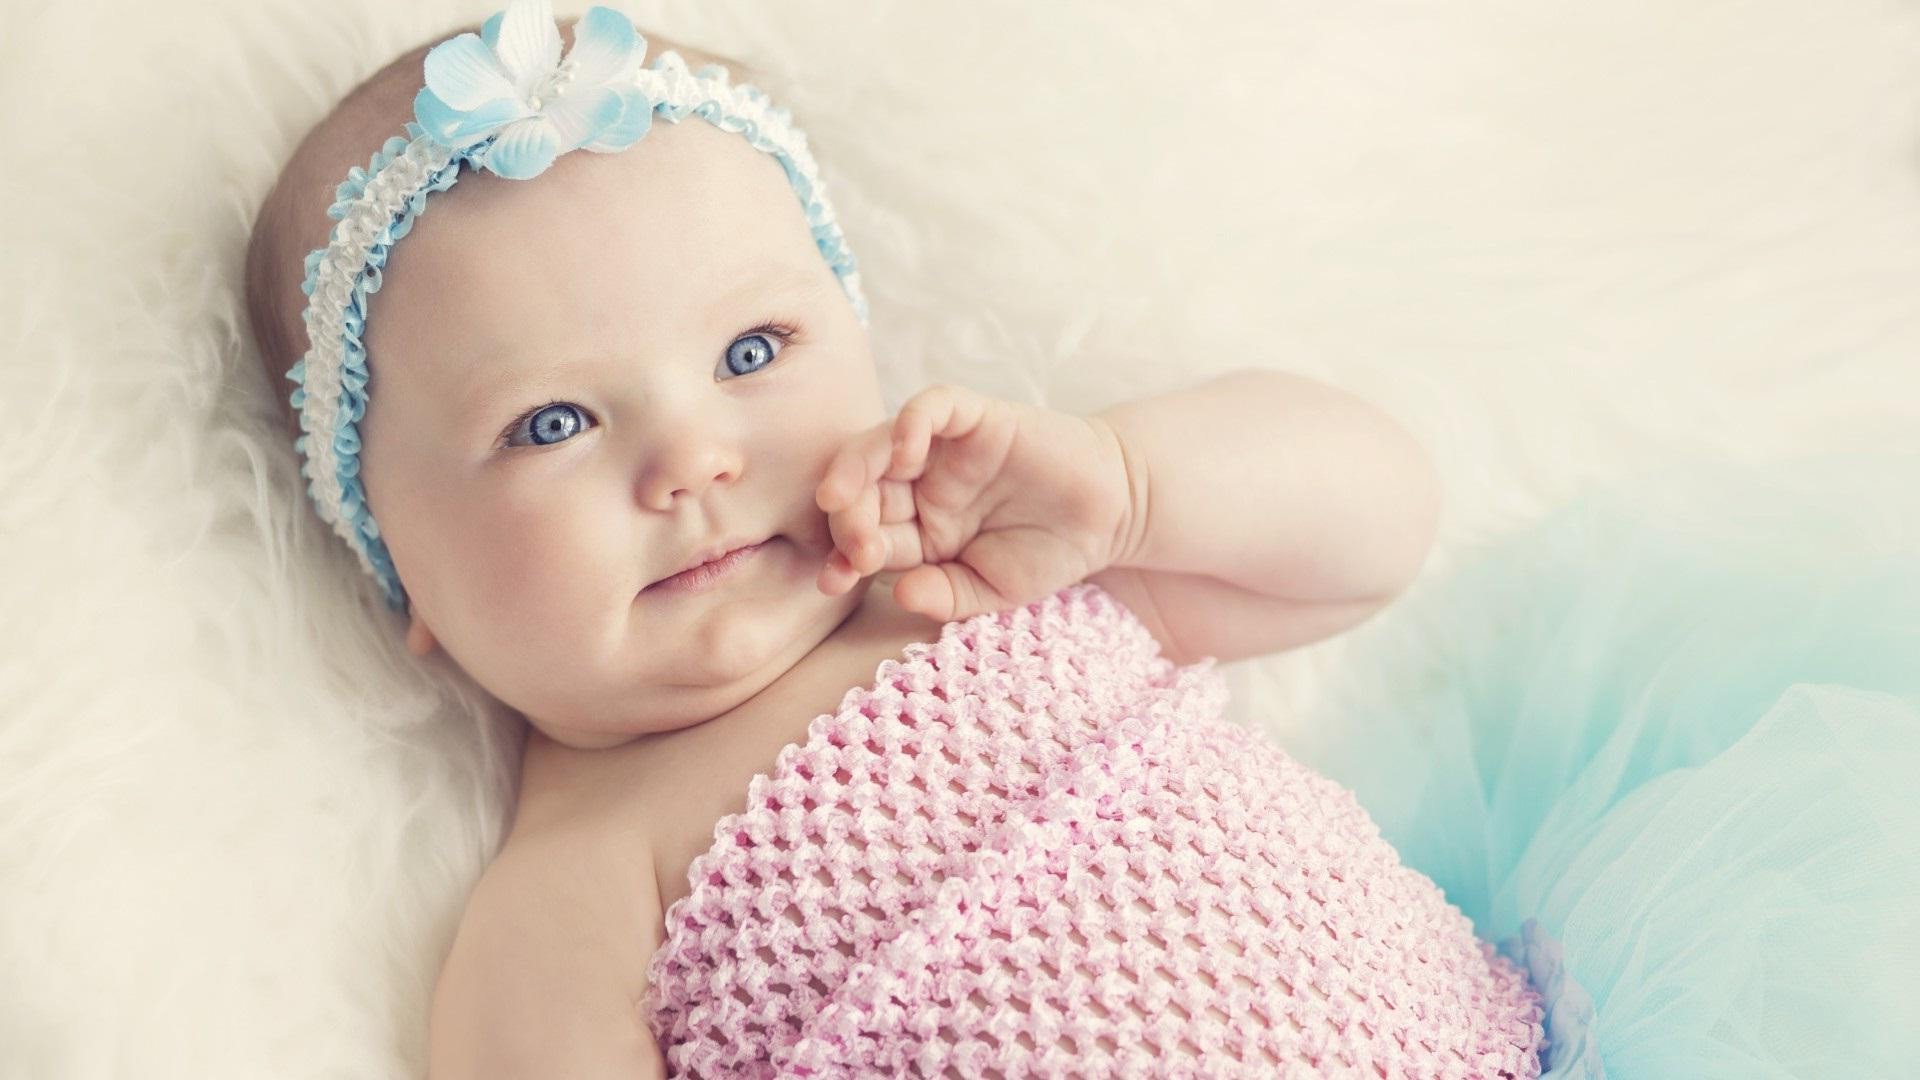 Baby Photos Wallpapers - Baby Photos Chubby Hd - HD Wallpaper 